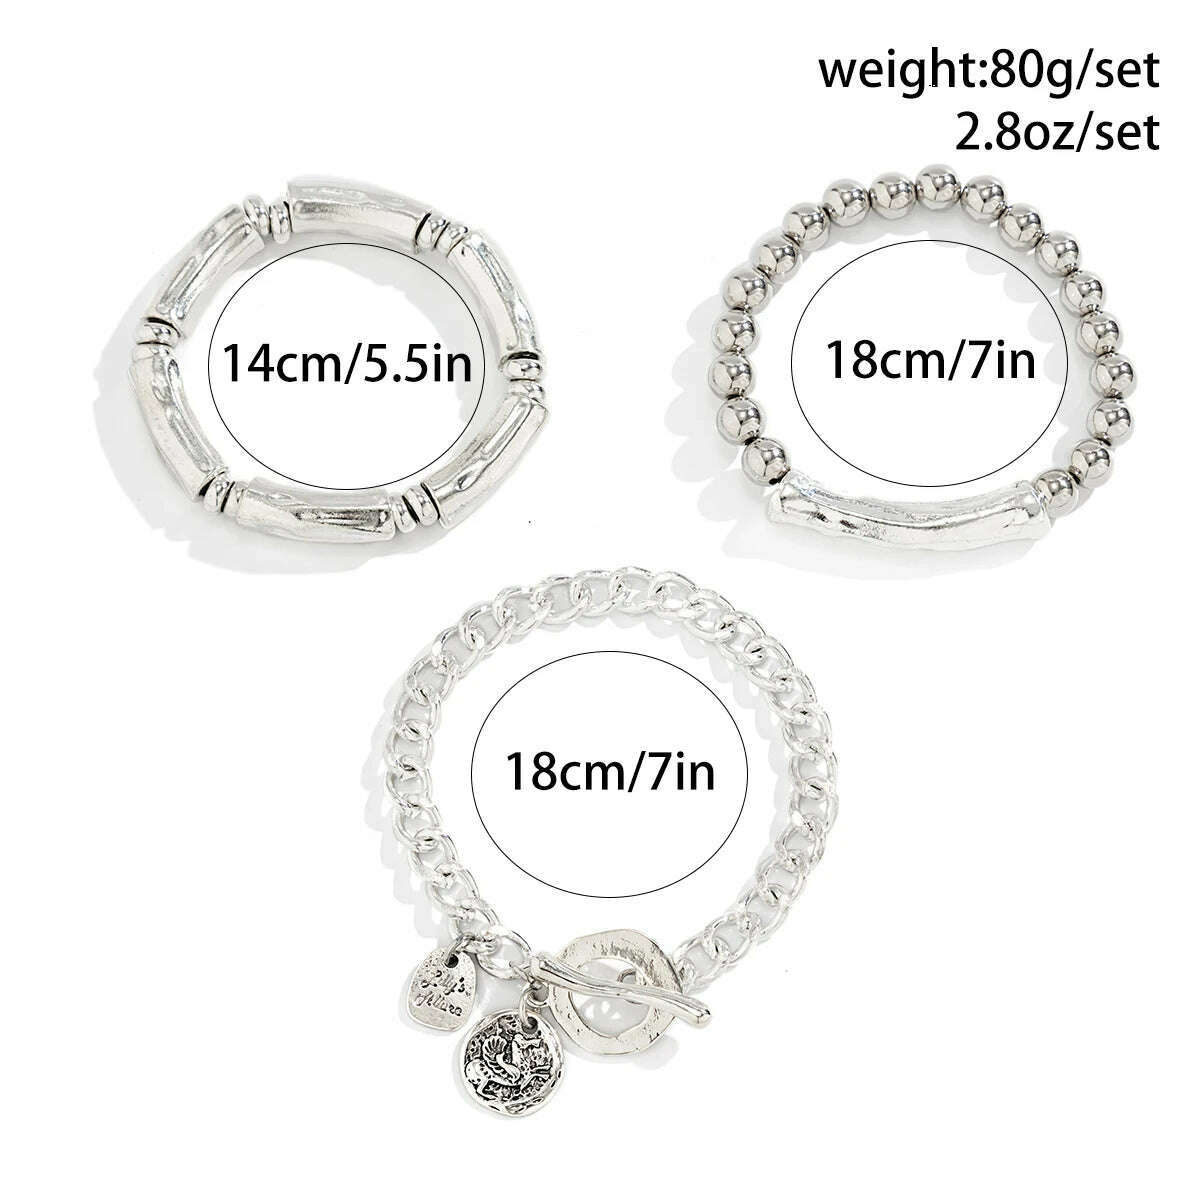 KIMLUD, Ingemark 4Pcs/Set Vintage OT Buckle Coin Pendant Bracelet for Women on Hand Goth Open Charm Bangles Couple Friends Jewelry Gift, KIMLUD Womens Clothes